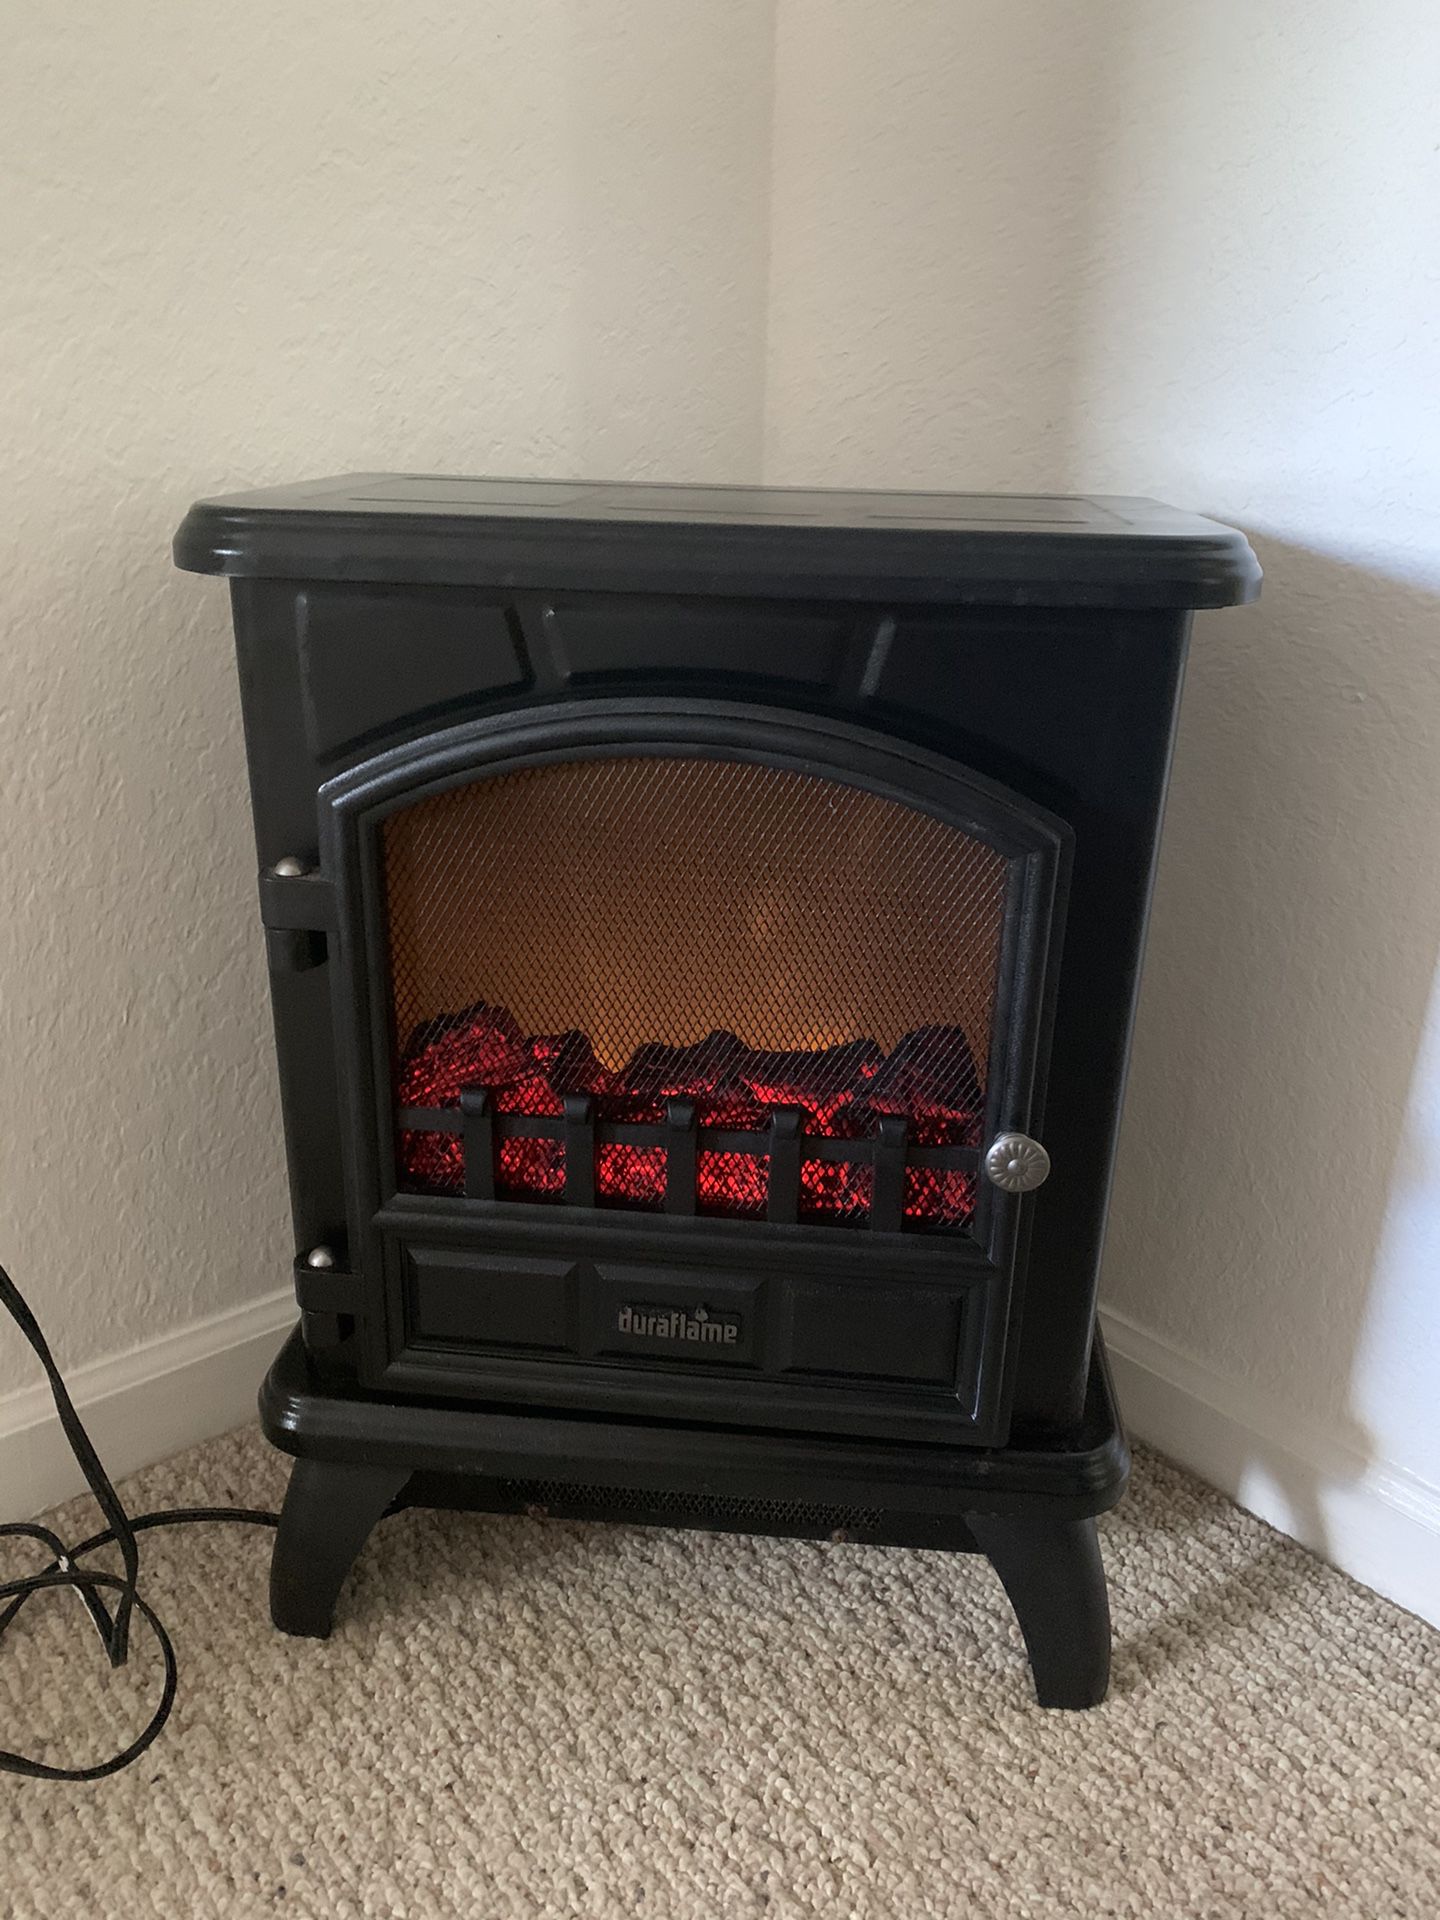 Home Depot electronic fireplace with both heat and only light settings.